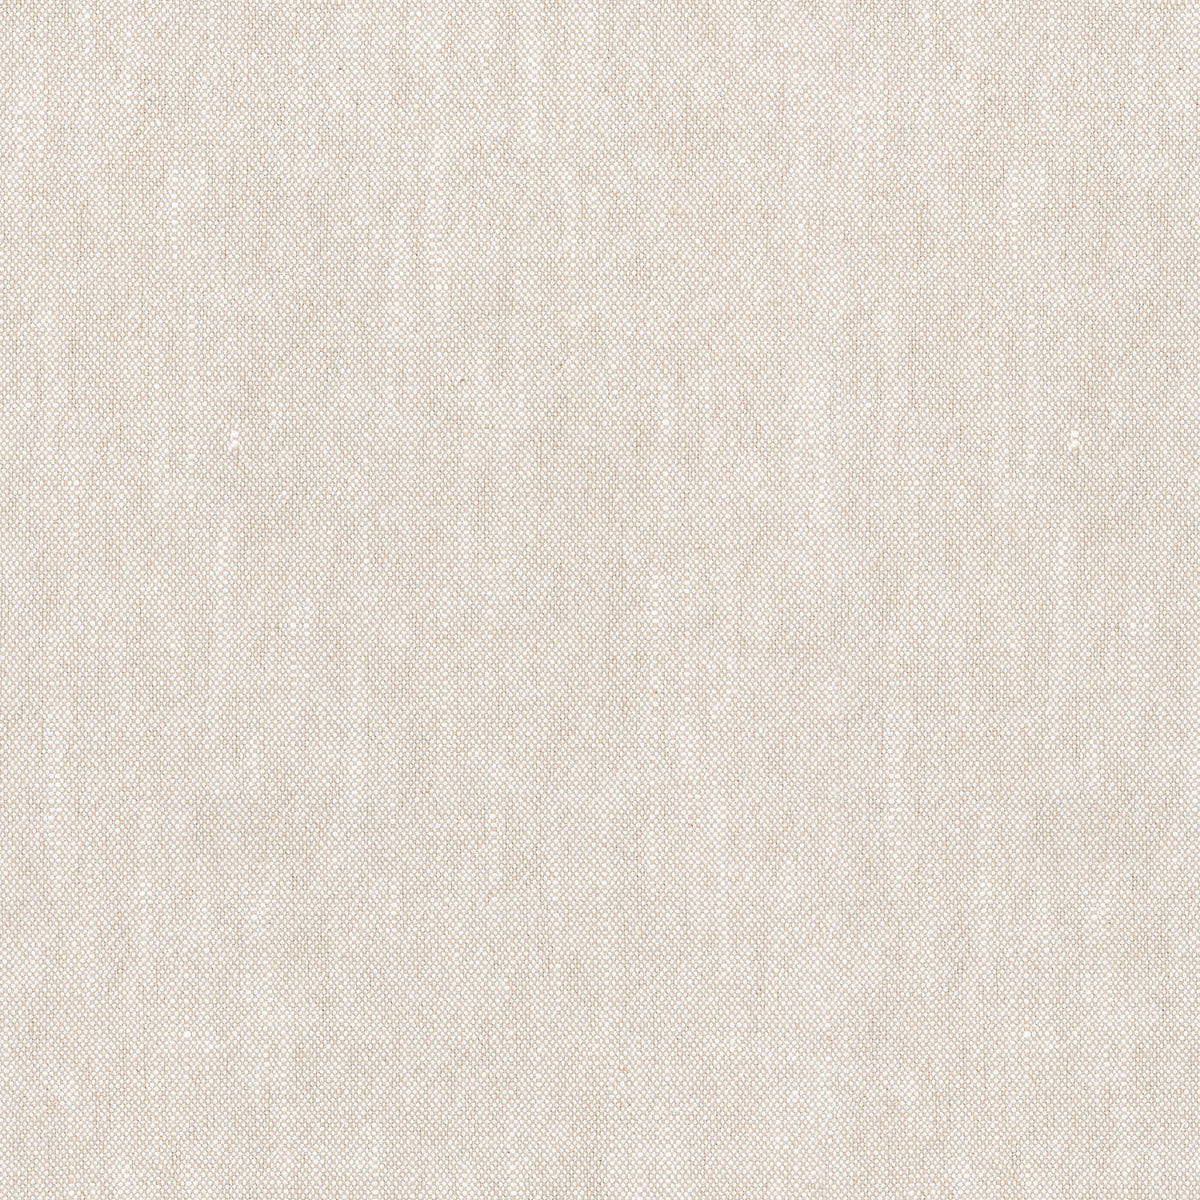 Ellen Degeneres - Cleary Twine 250440 Solid Upholstery Fabric